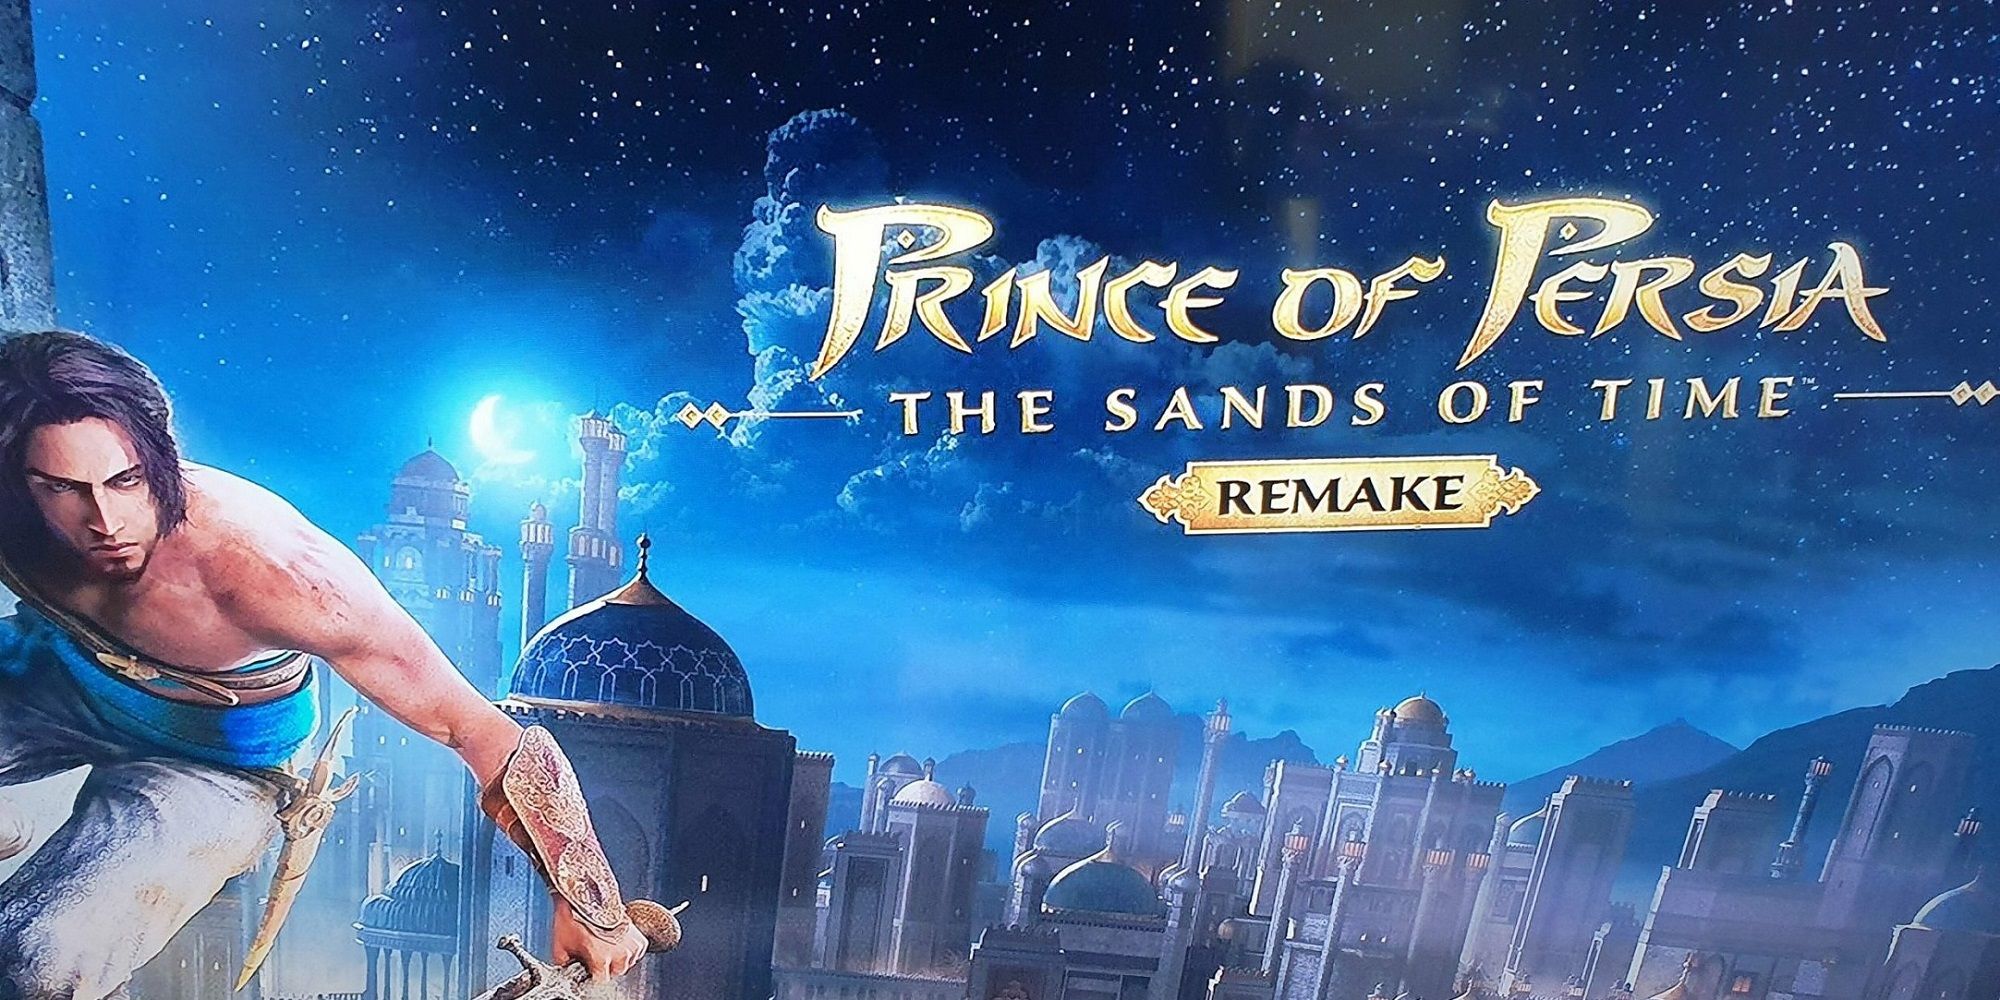 Prince of Persia The Sands Of Time Remake Screenshots Leaked